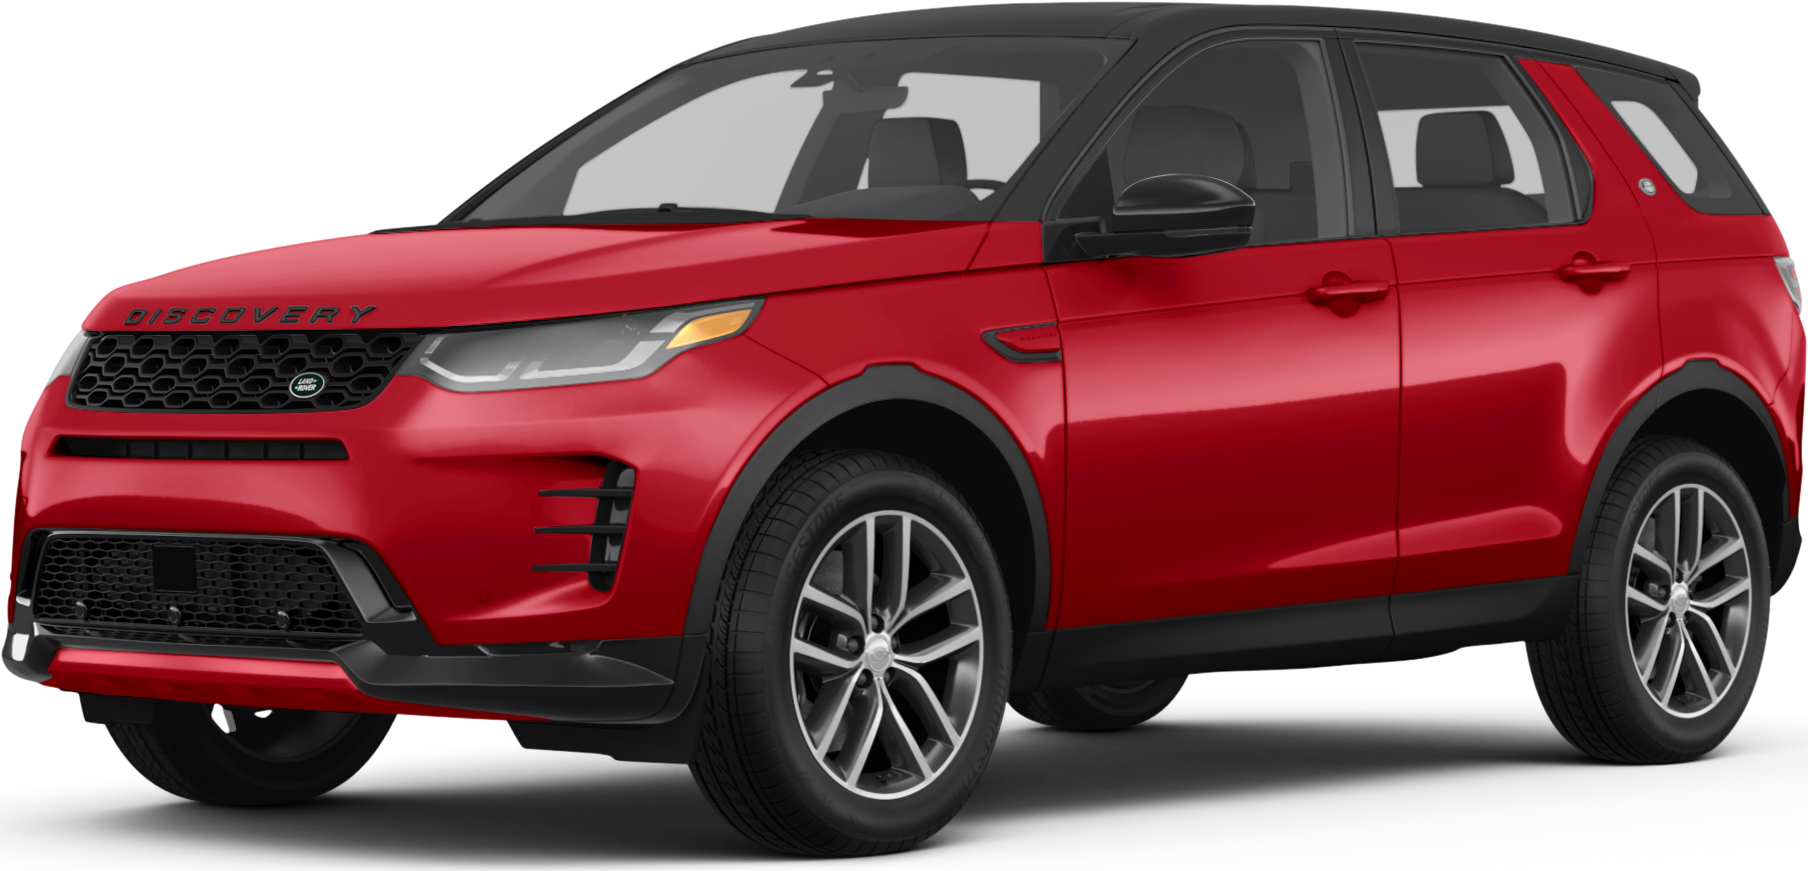 2019 Land Rover Discovery Specs, Price, MPG & Reviews